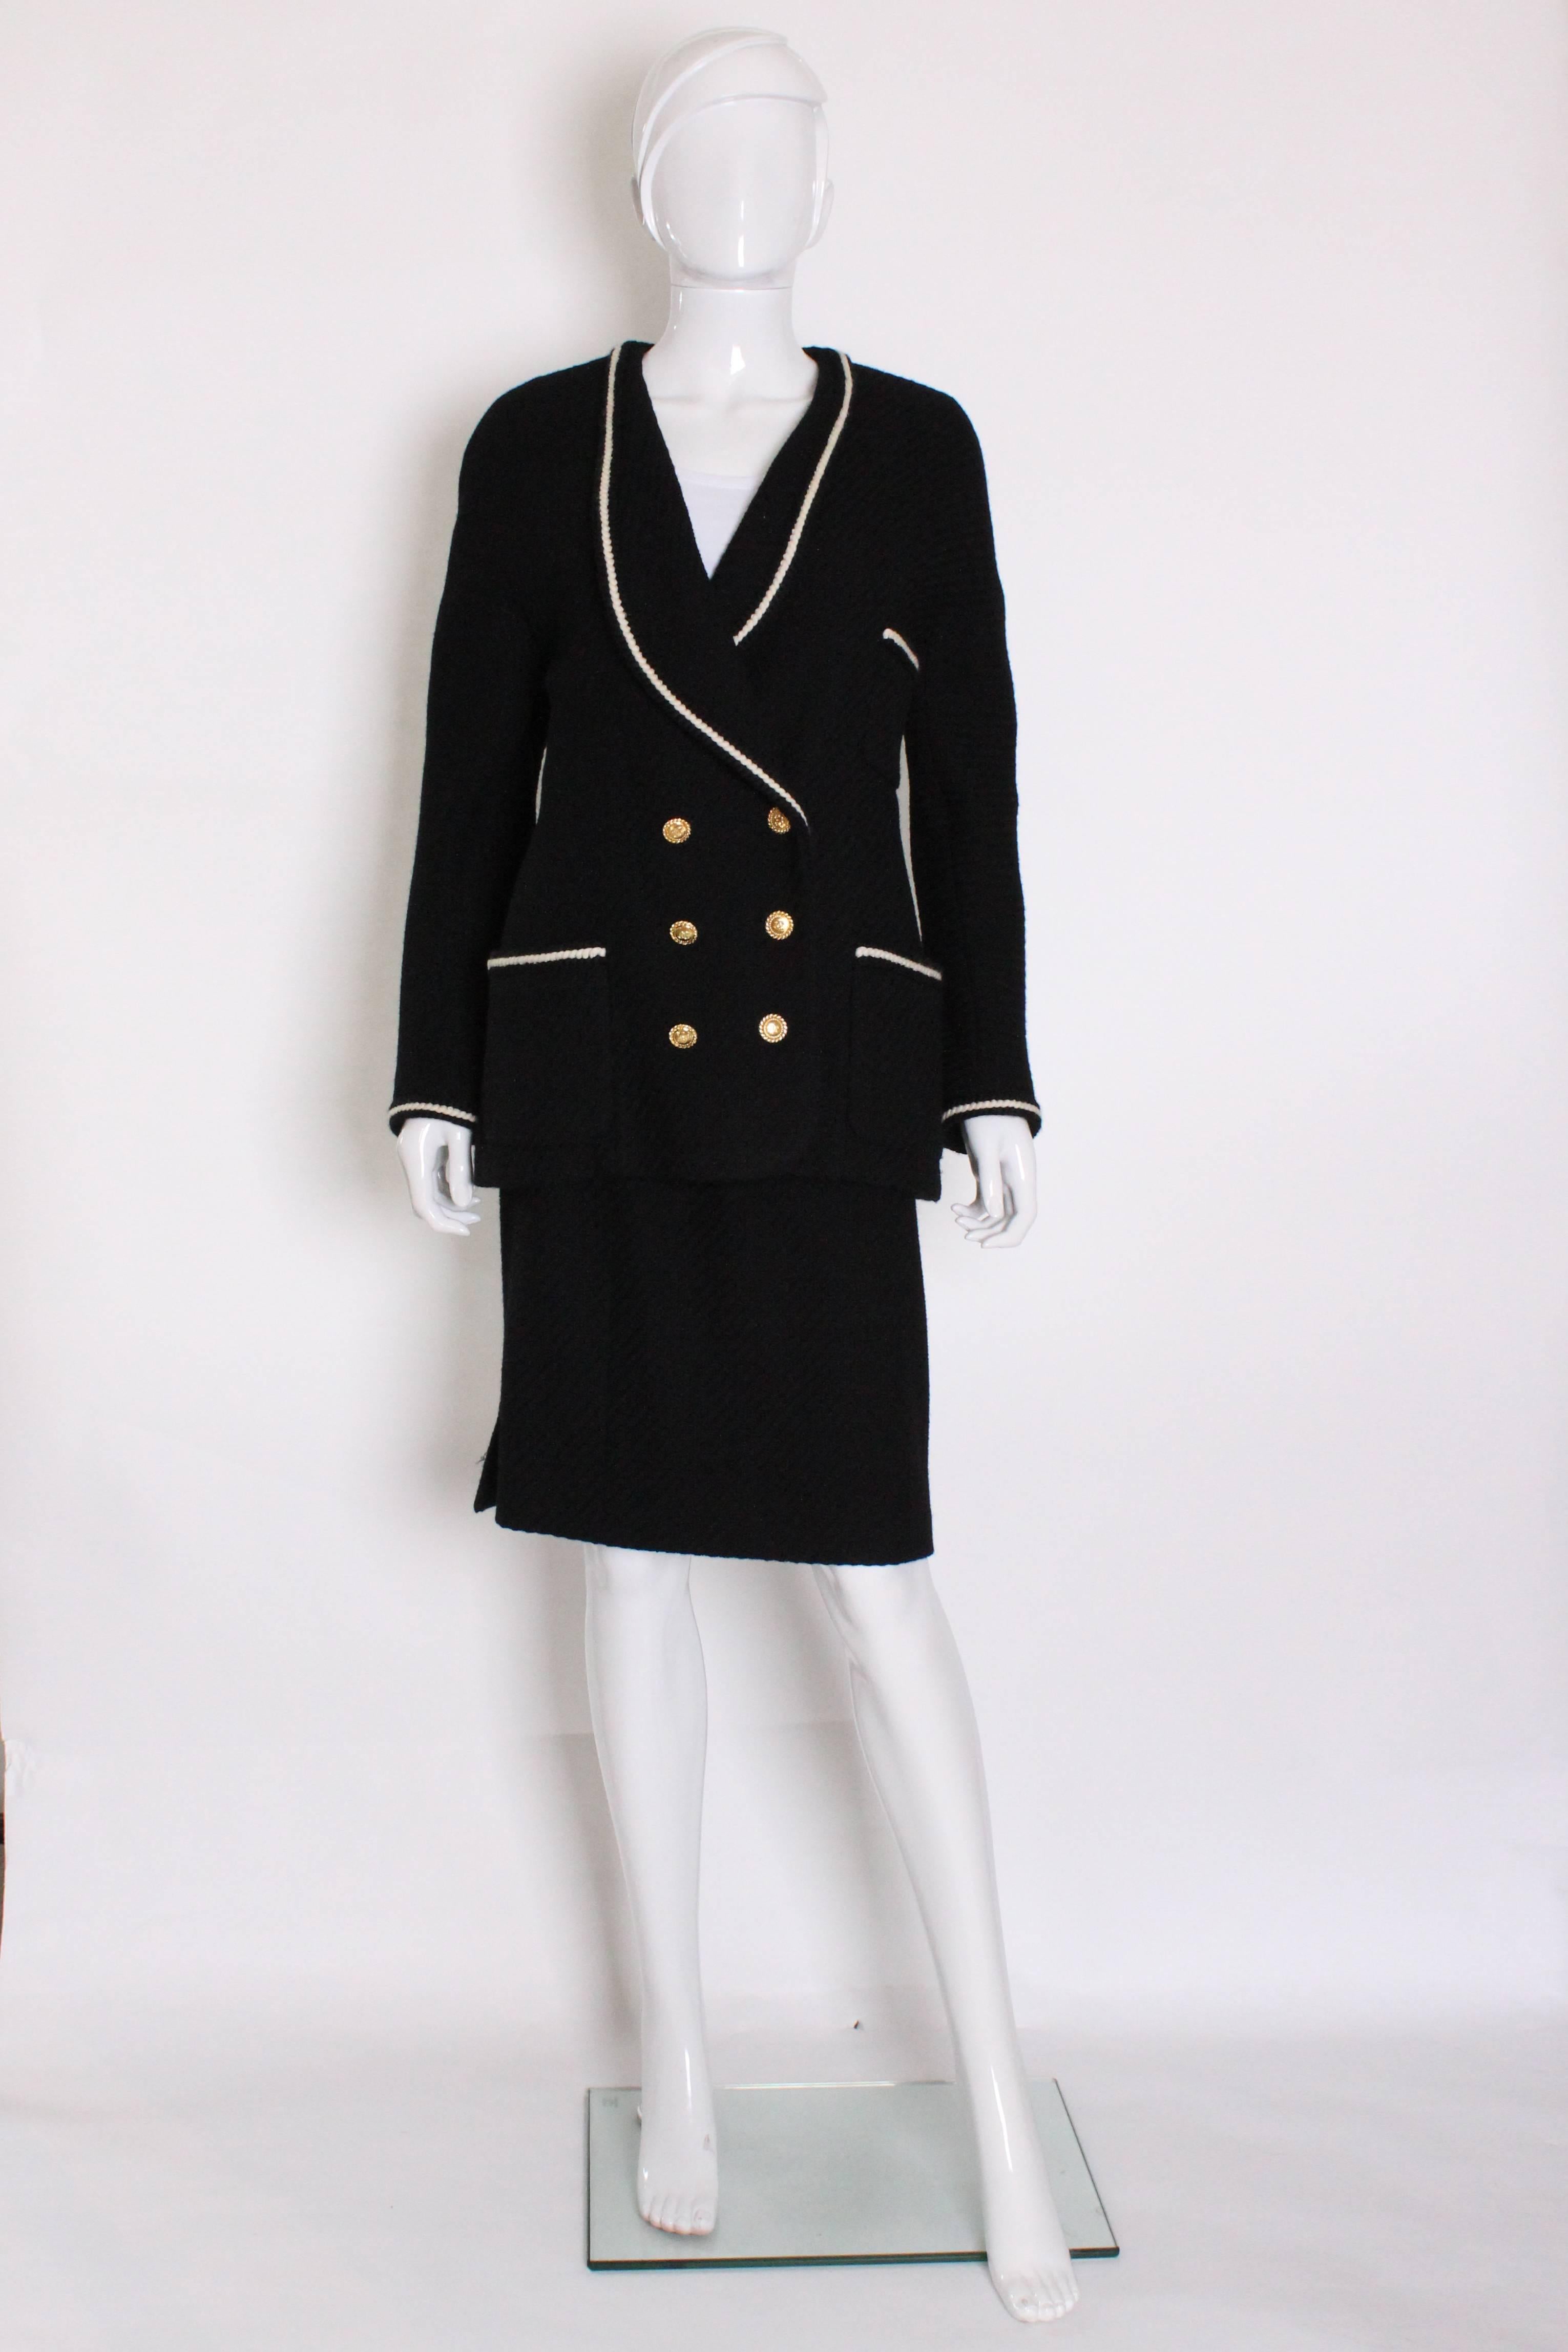 

A charming and chic skirt suit from the French house of Chanel.
The jacket is black with white trim. It has a narrow shawl collar with 2 hip level pockets and one breast pocket.It is double breasted with 6 buttons on the front and 4 on each